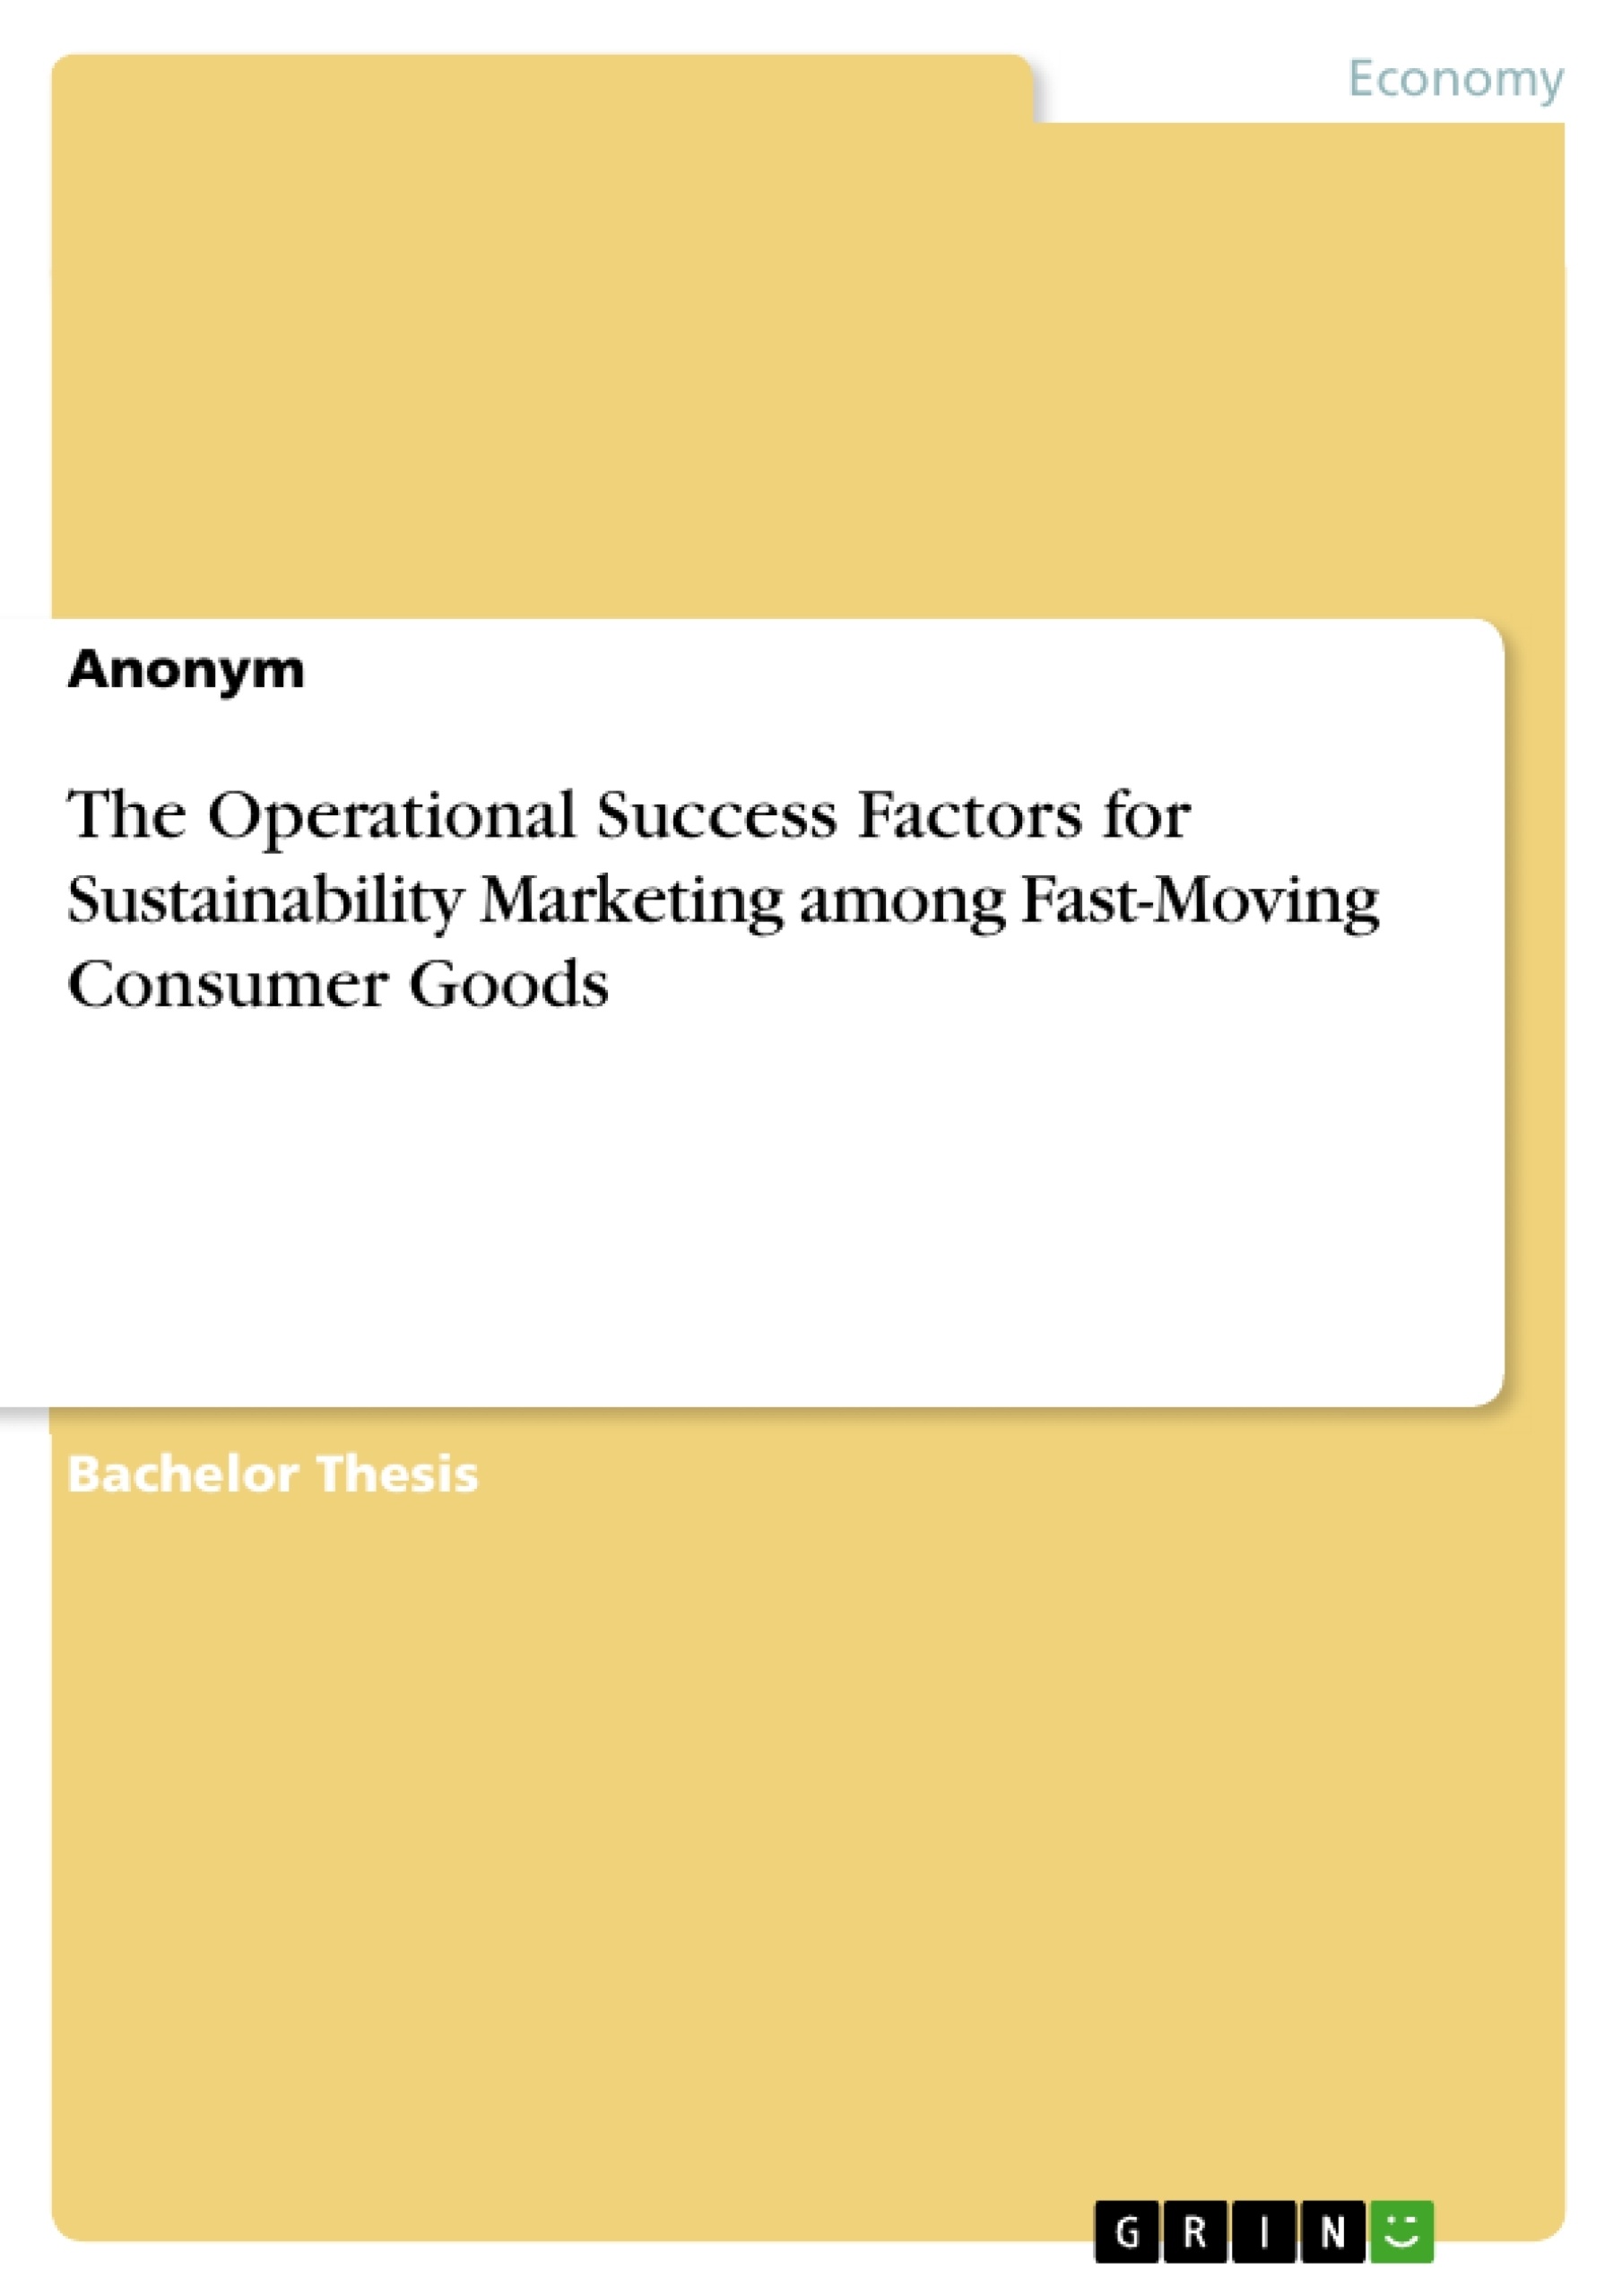 Title: The Operational Success Factors for Sustainability Marketing among Fast-Moving Consumer Goods